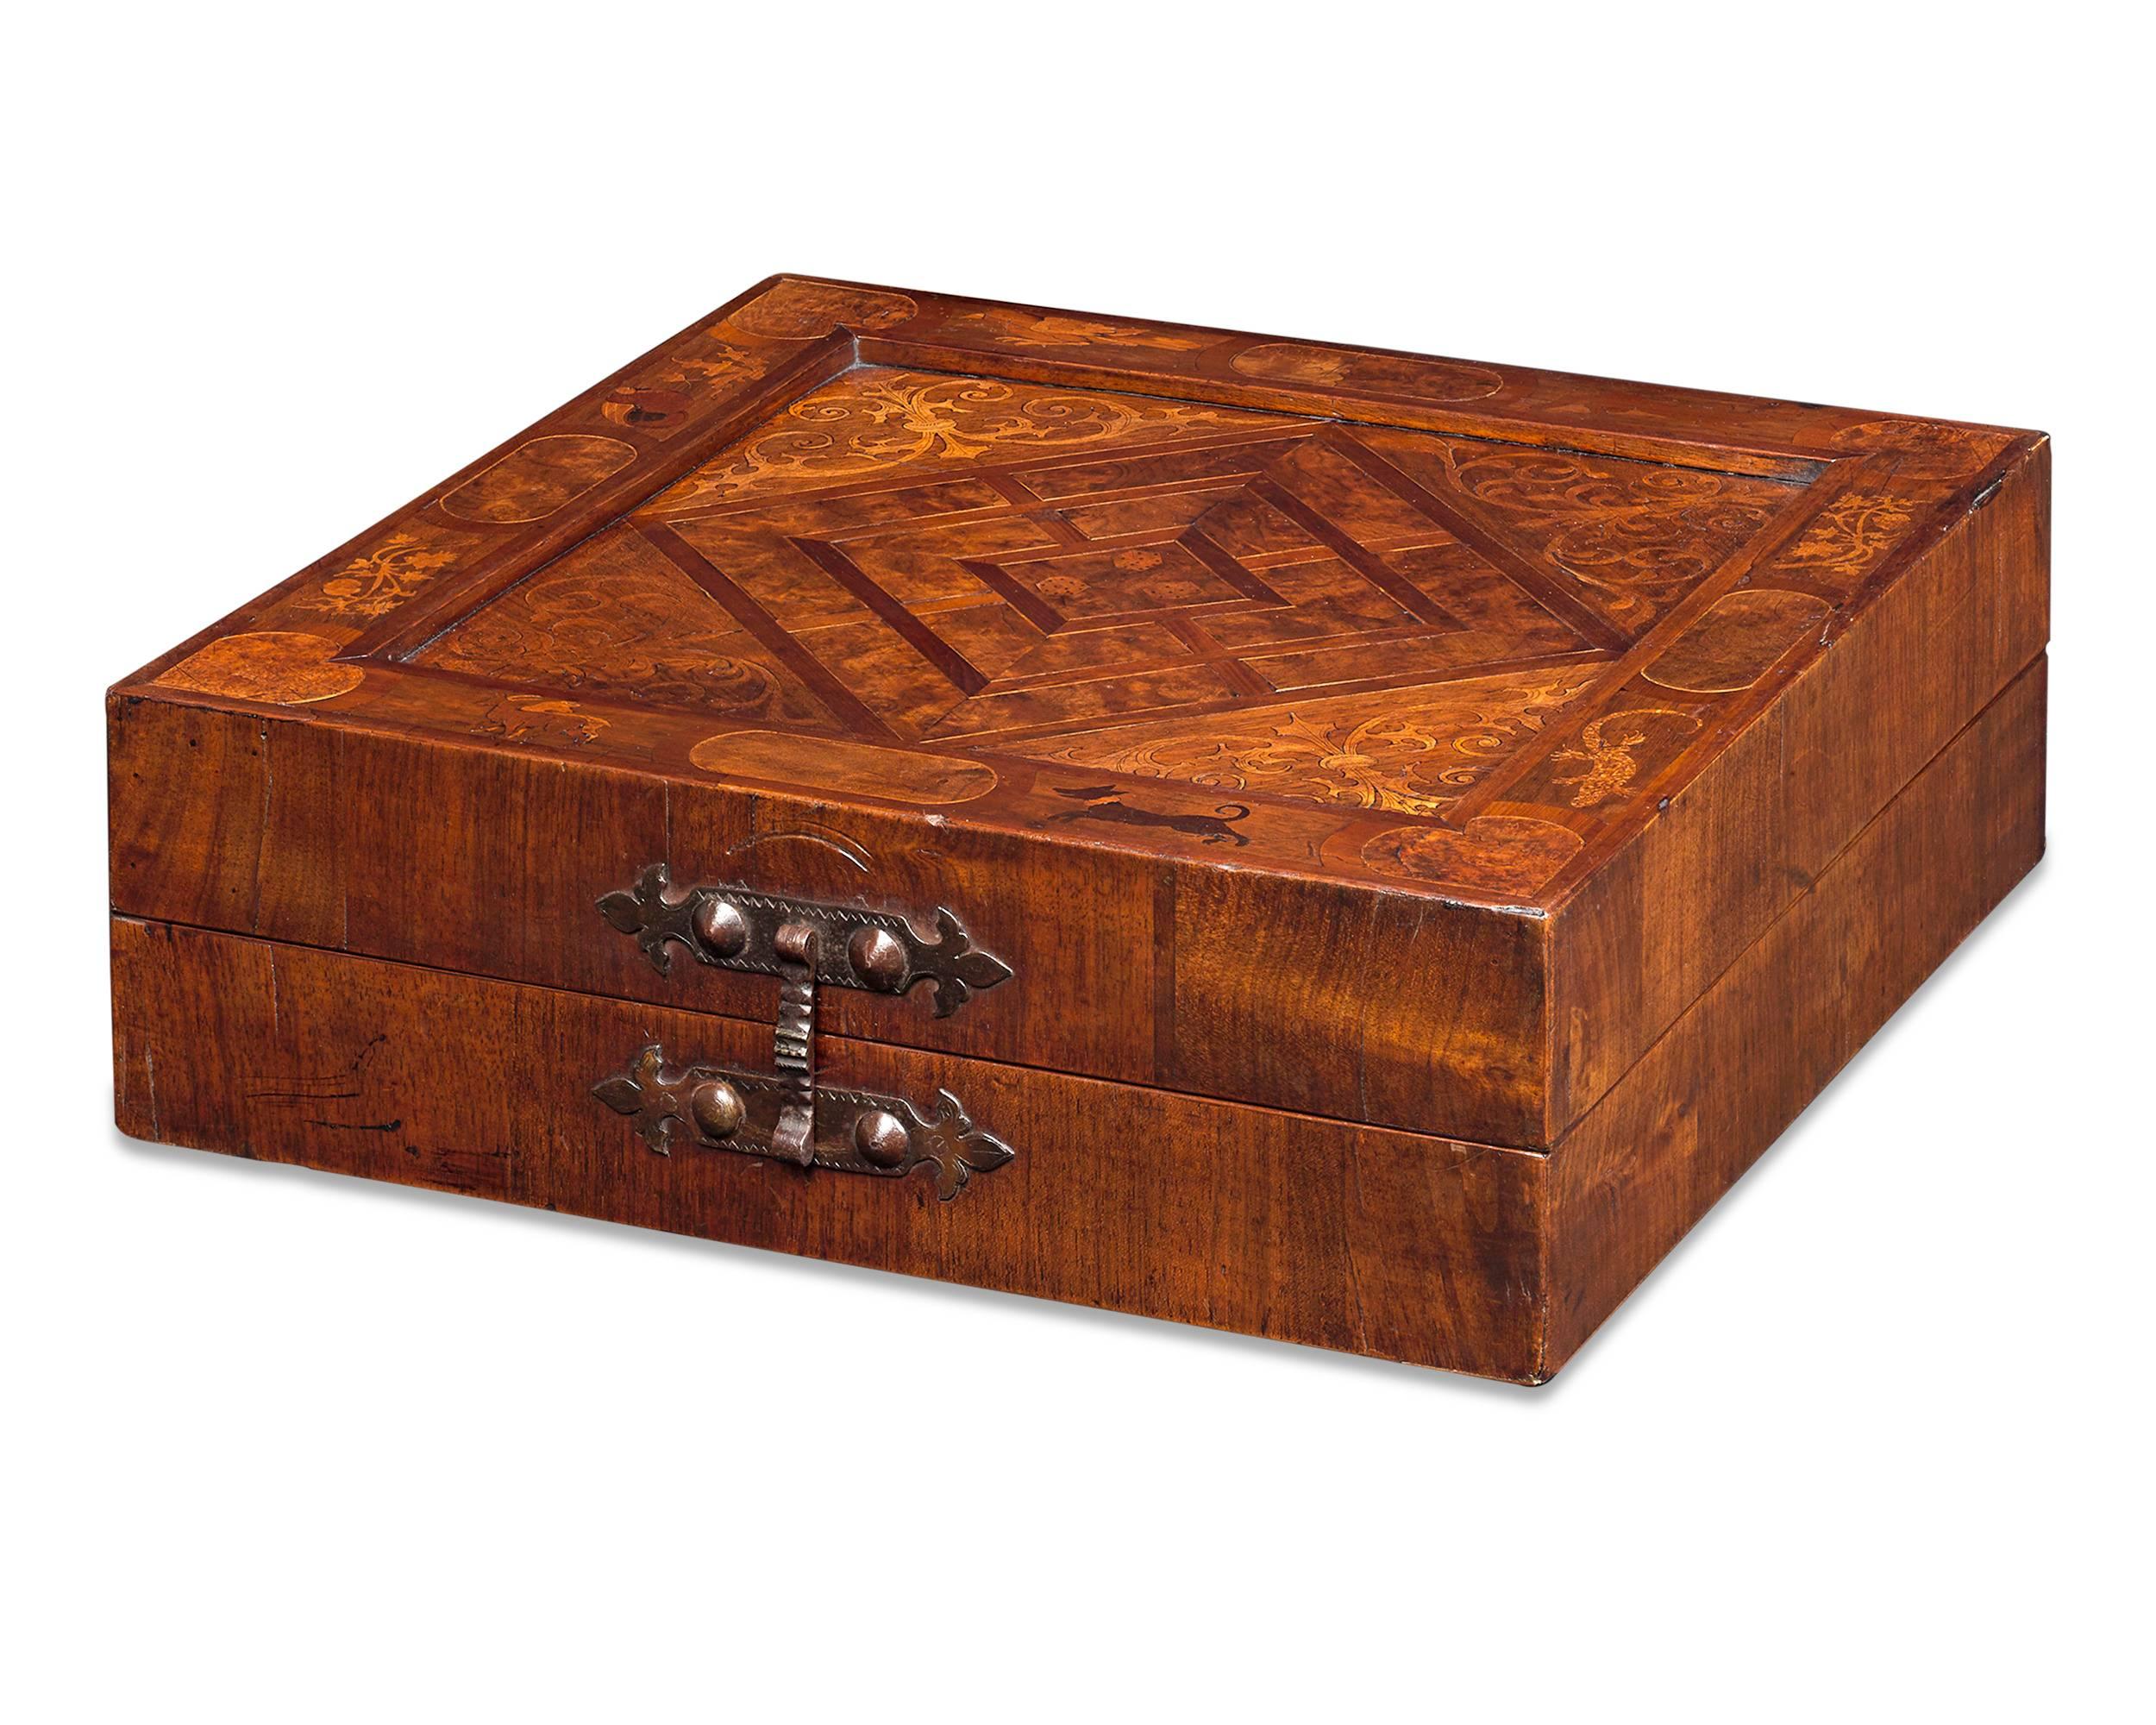 Remarkable condition and craftsmanship distinguish this 17th century German games box. Most likely created in southern Germany, an area well-known for its marquetry craftsmen, such an early and high-quality box would have been a luxury afforded only